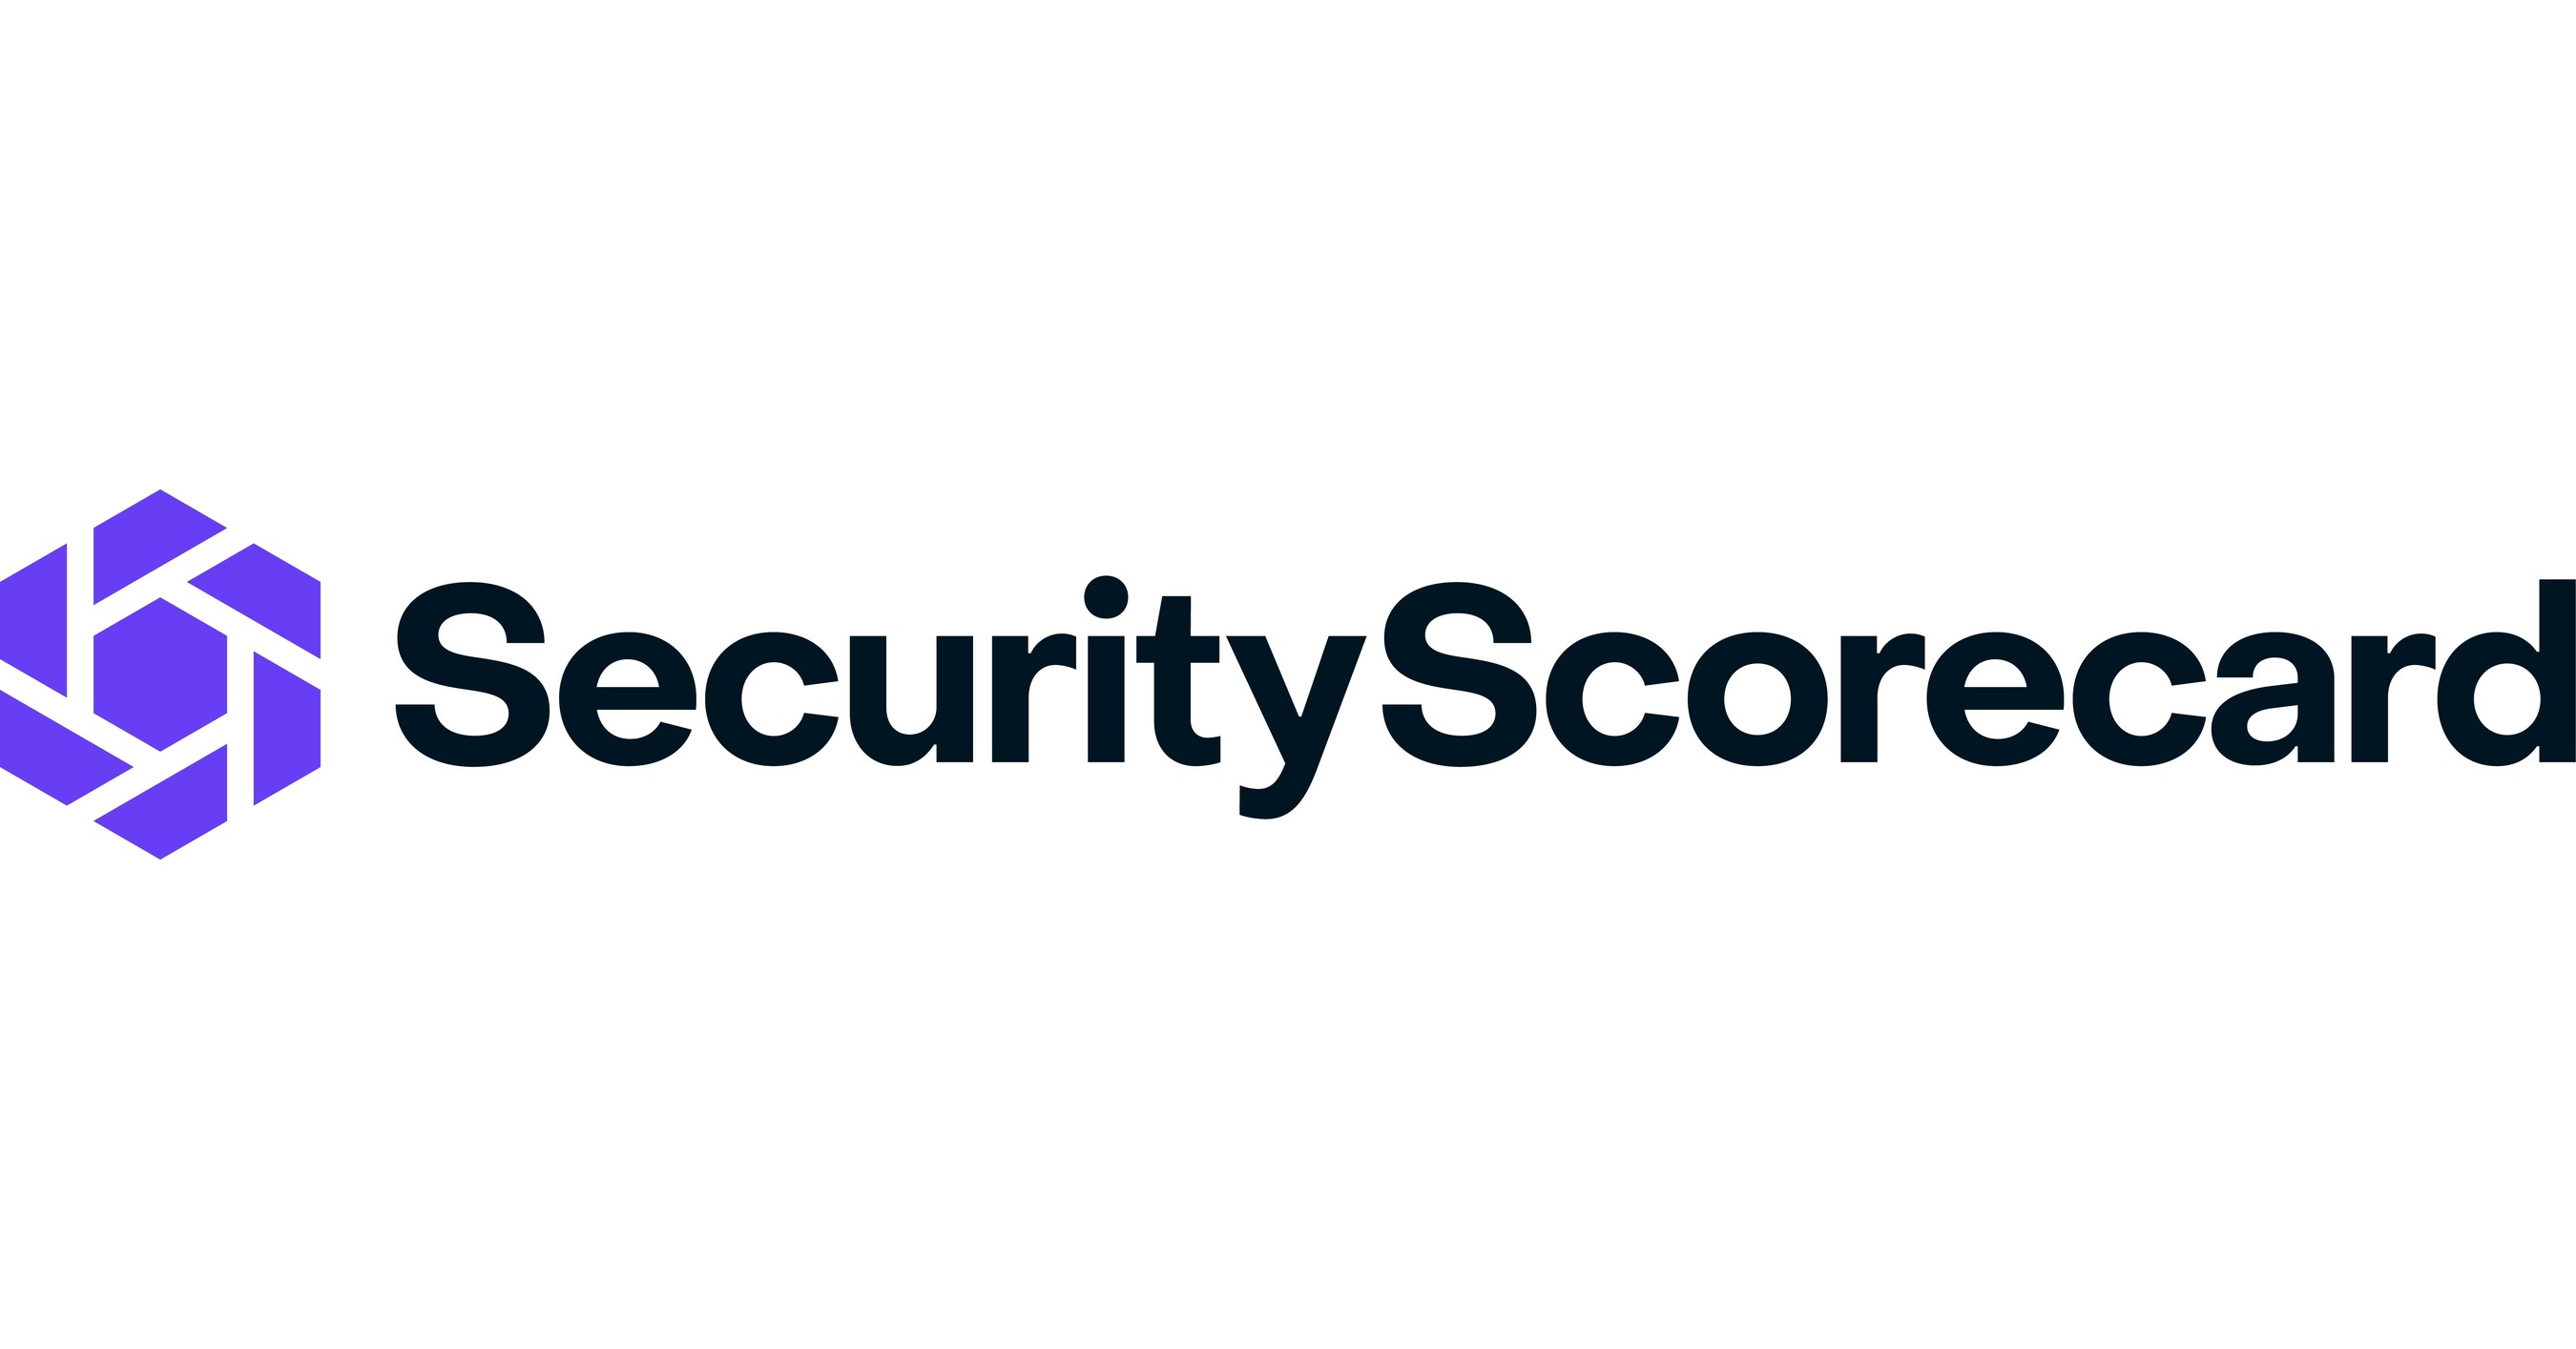 SecurityScorecard Named a Leader in Cybersecurity Risk Rating Platforms by Independent Research Firm